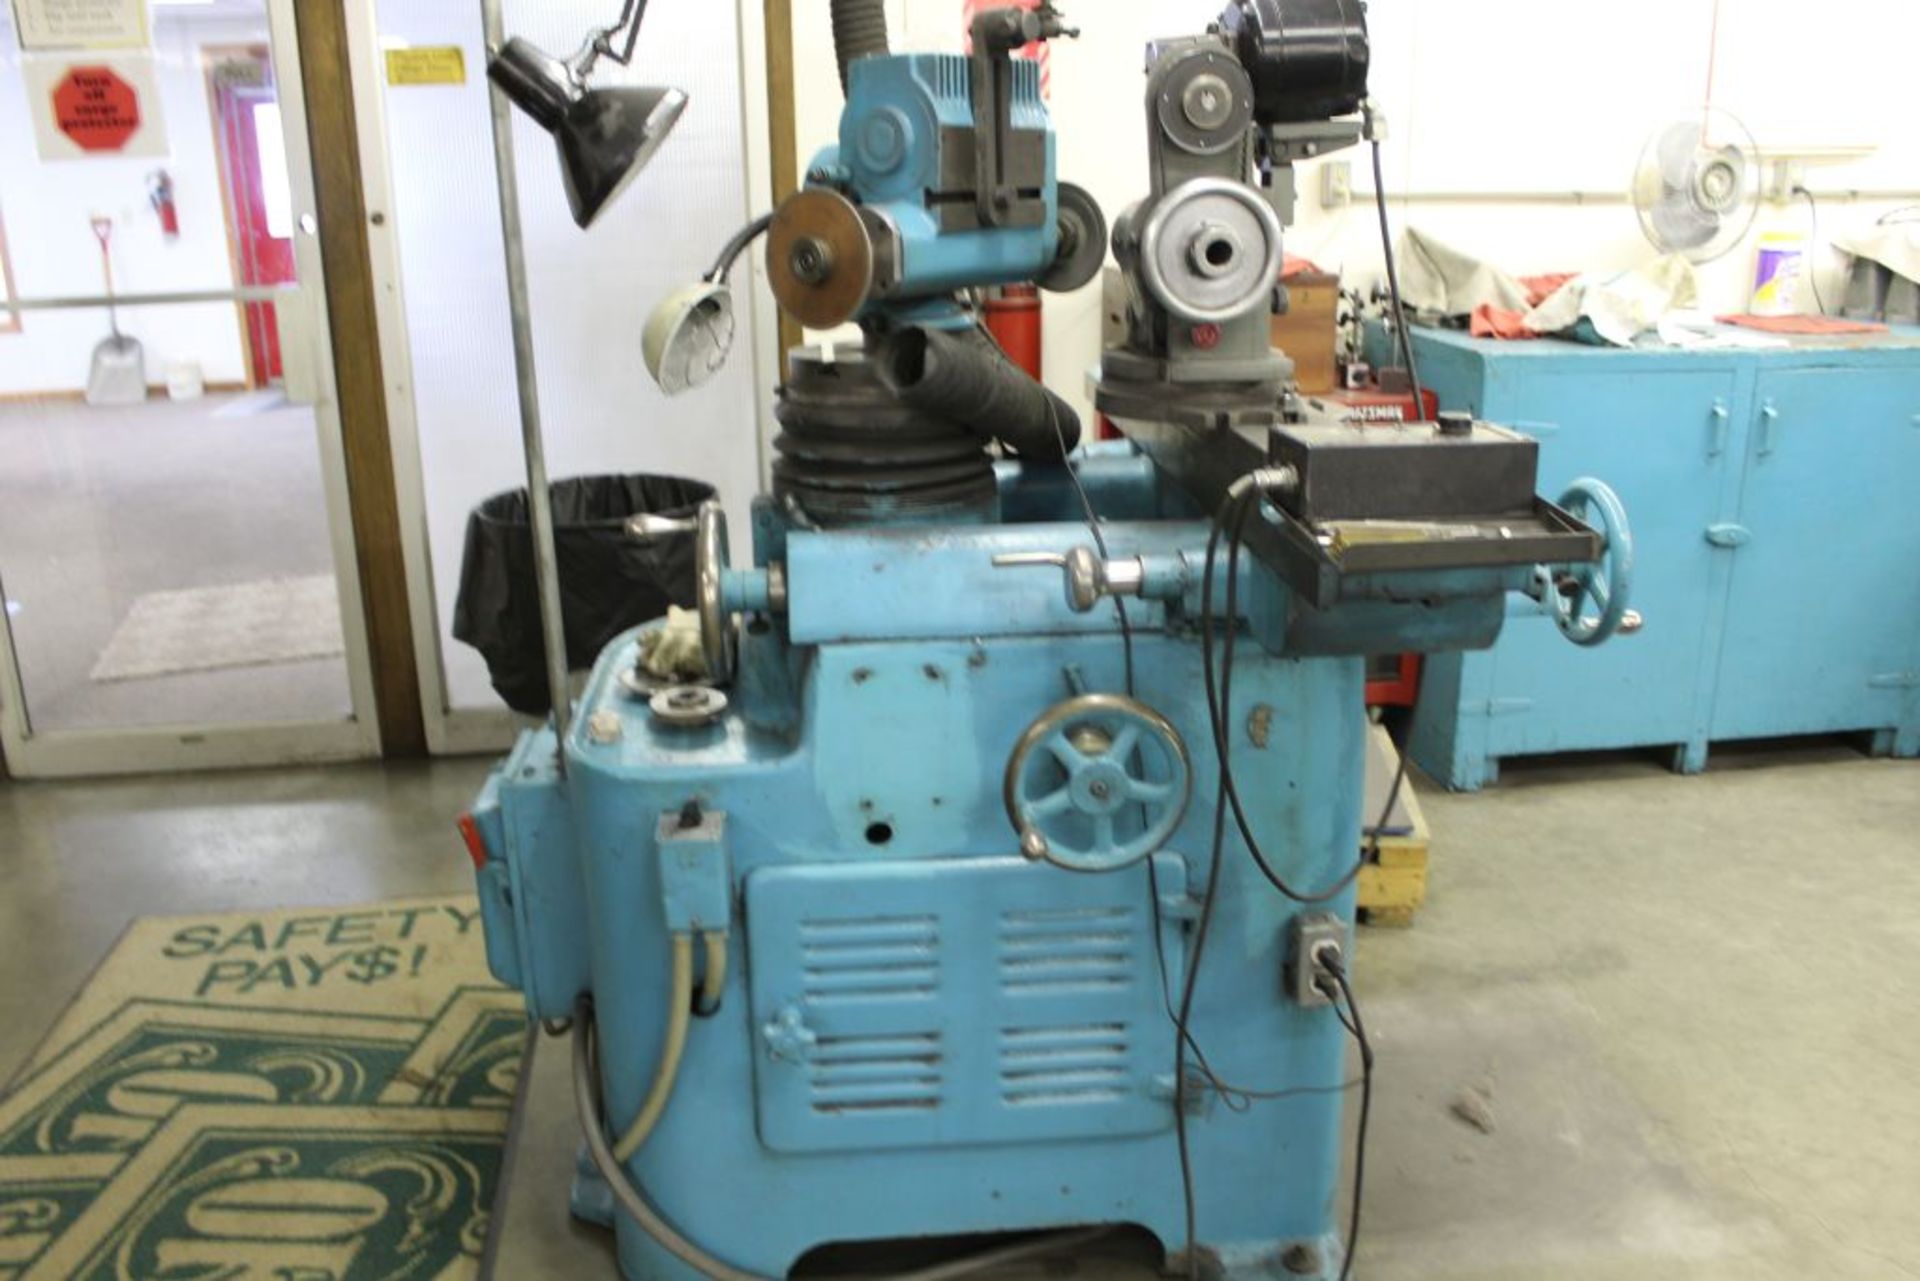 1943 Cincinnati model 2 tool & cutter grinder, sn 1D2T1M-187, has 2 axis 360 degree position - Image 6 of 6